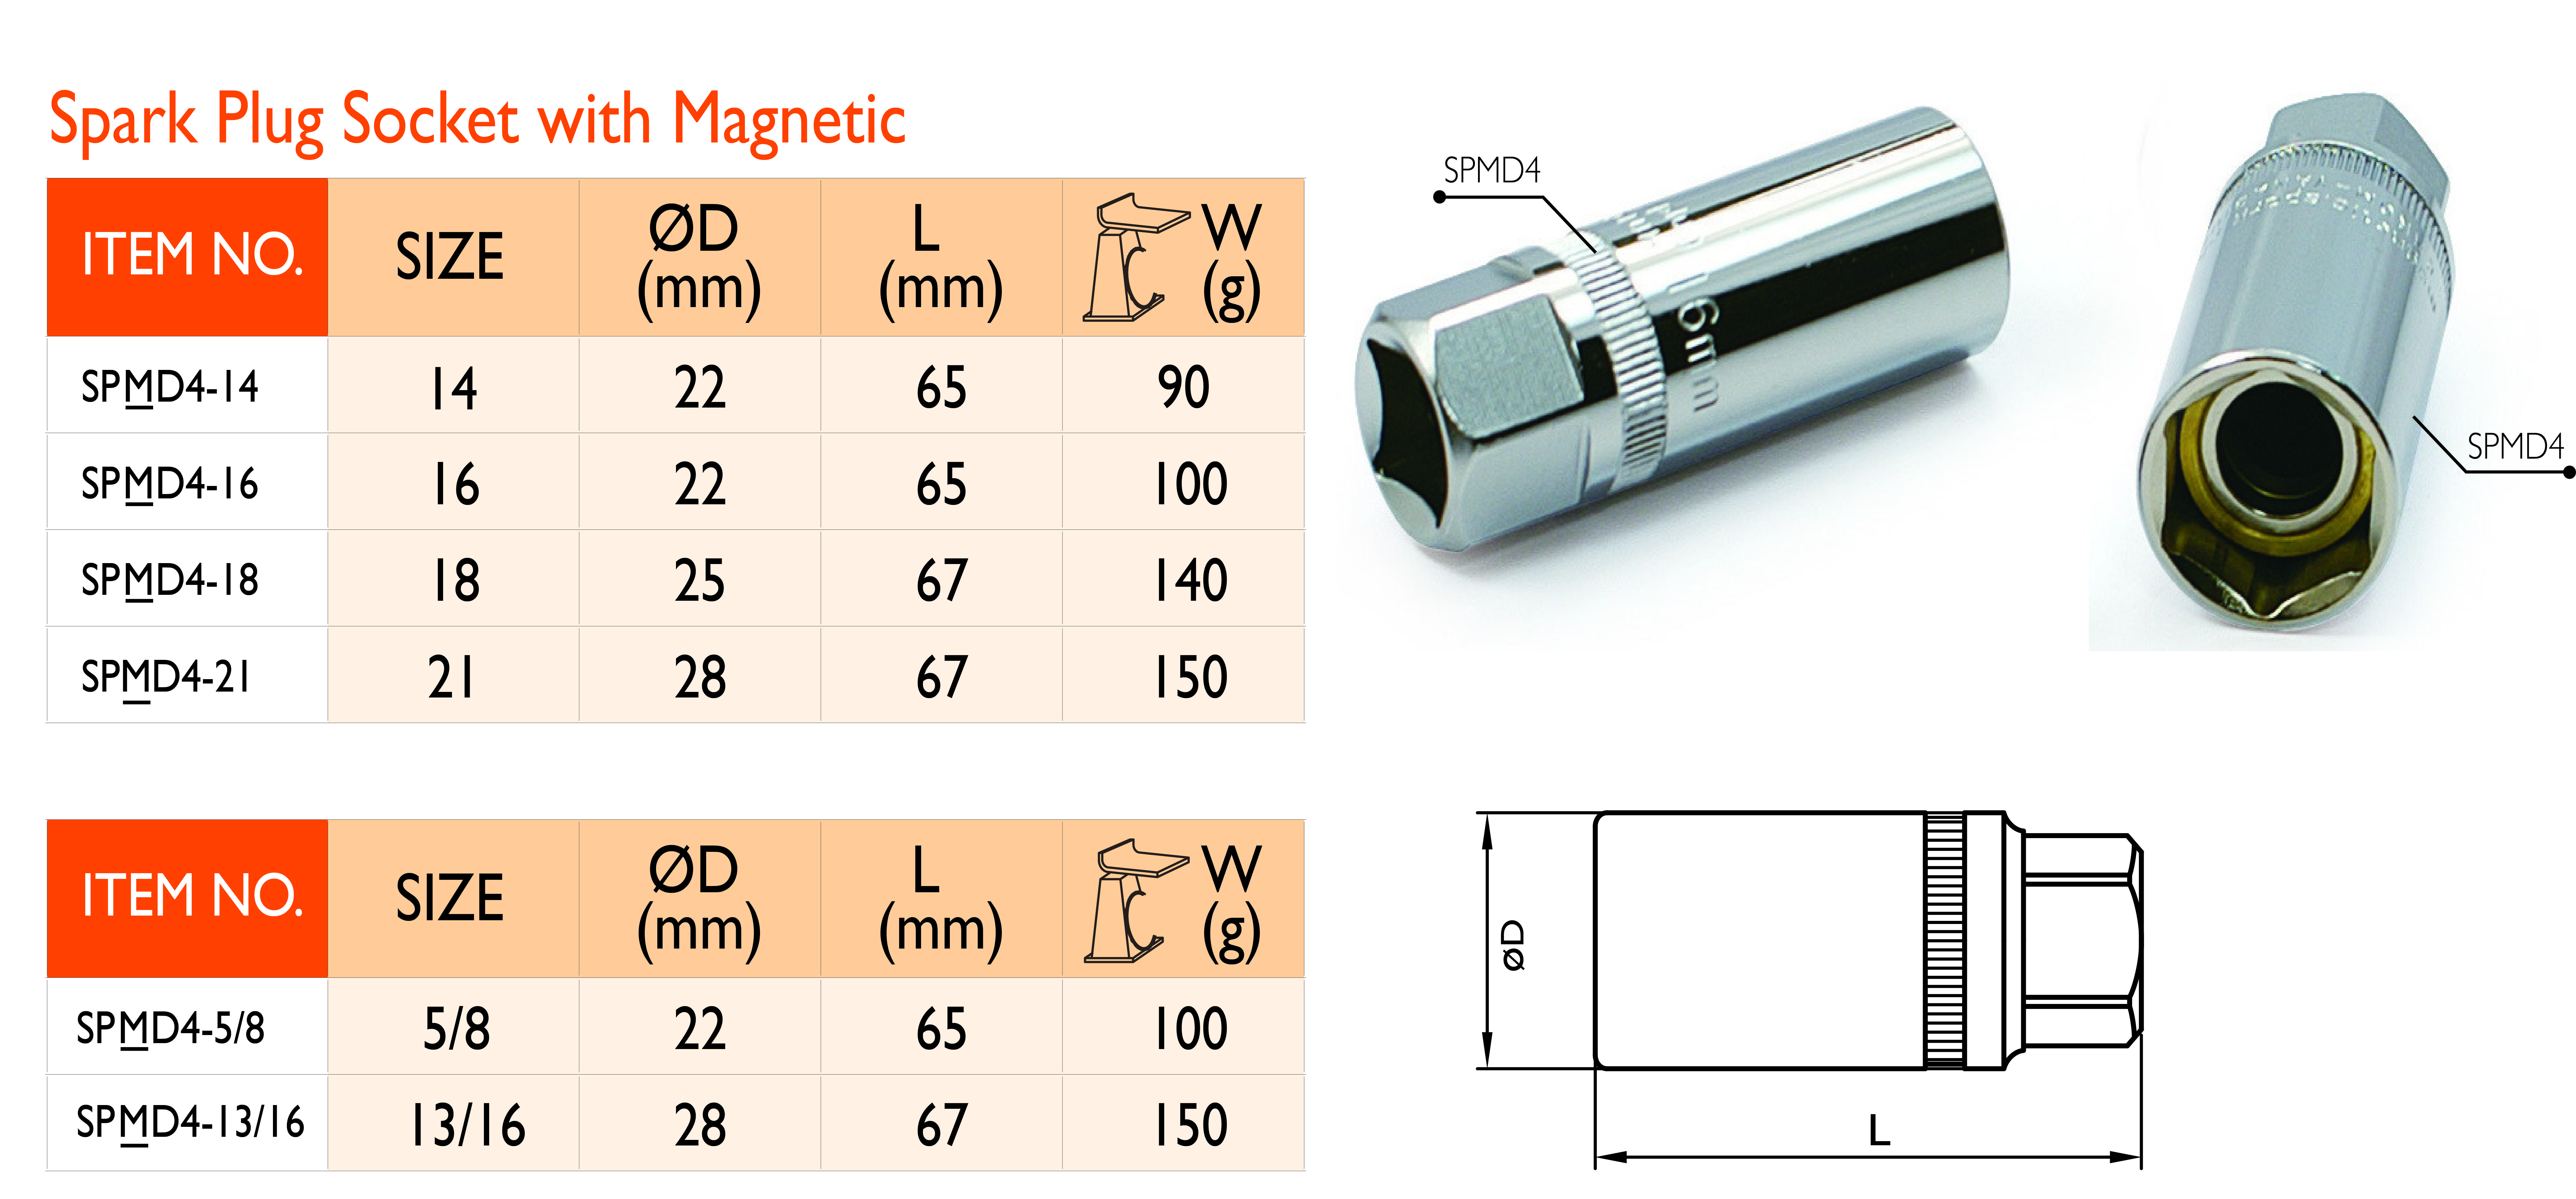 4_12 Spark Plug Socket with Magnetic_inch A.jpg